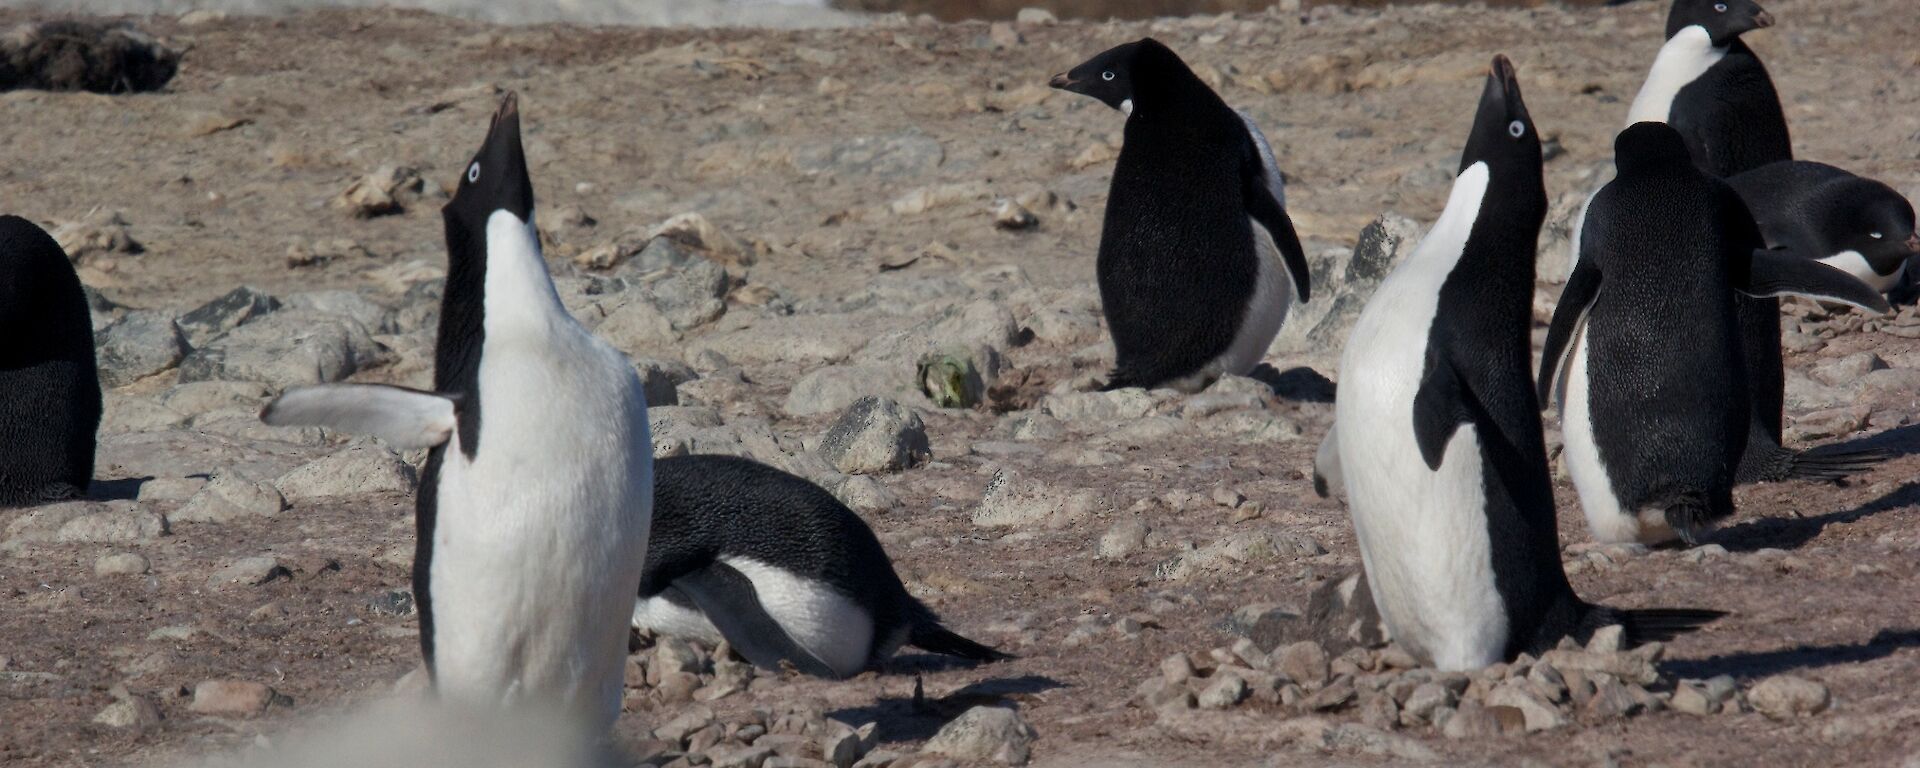 An Adelie penguin shows off